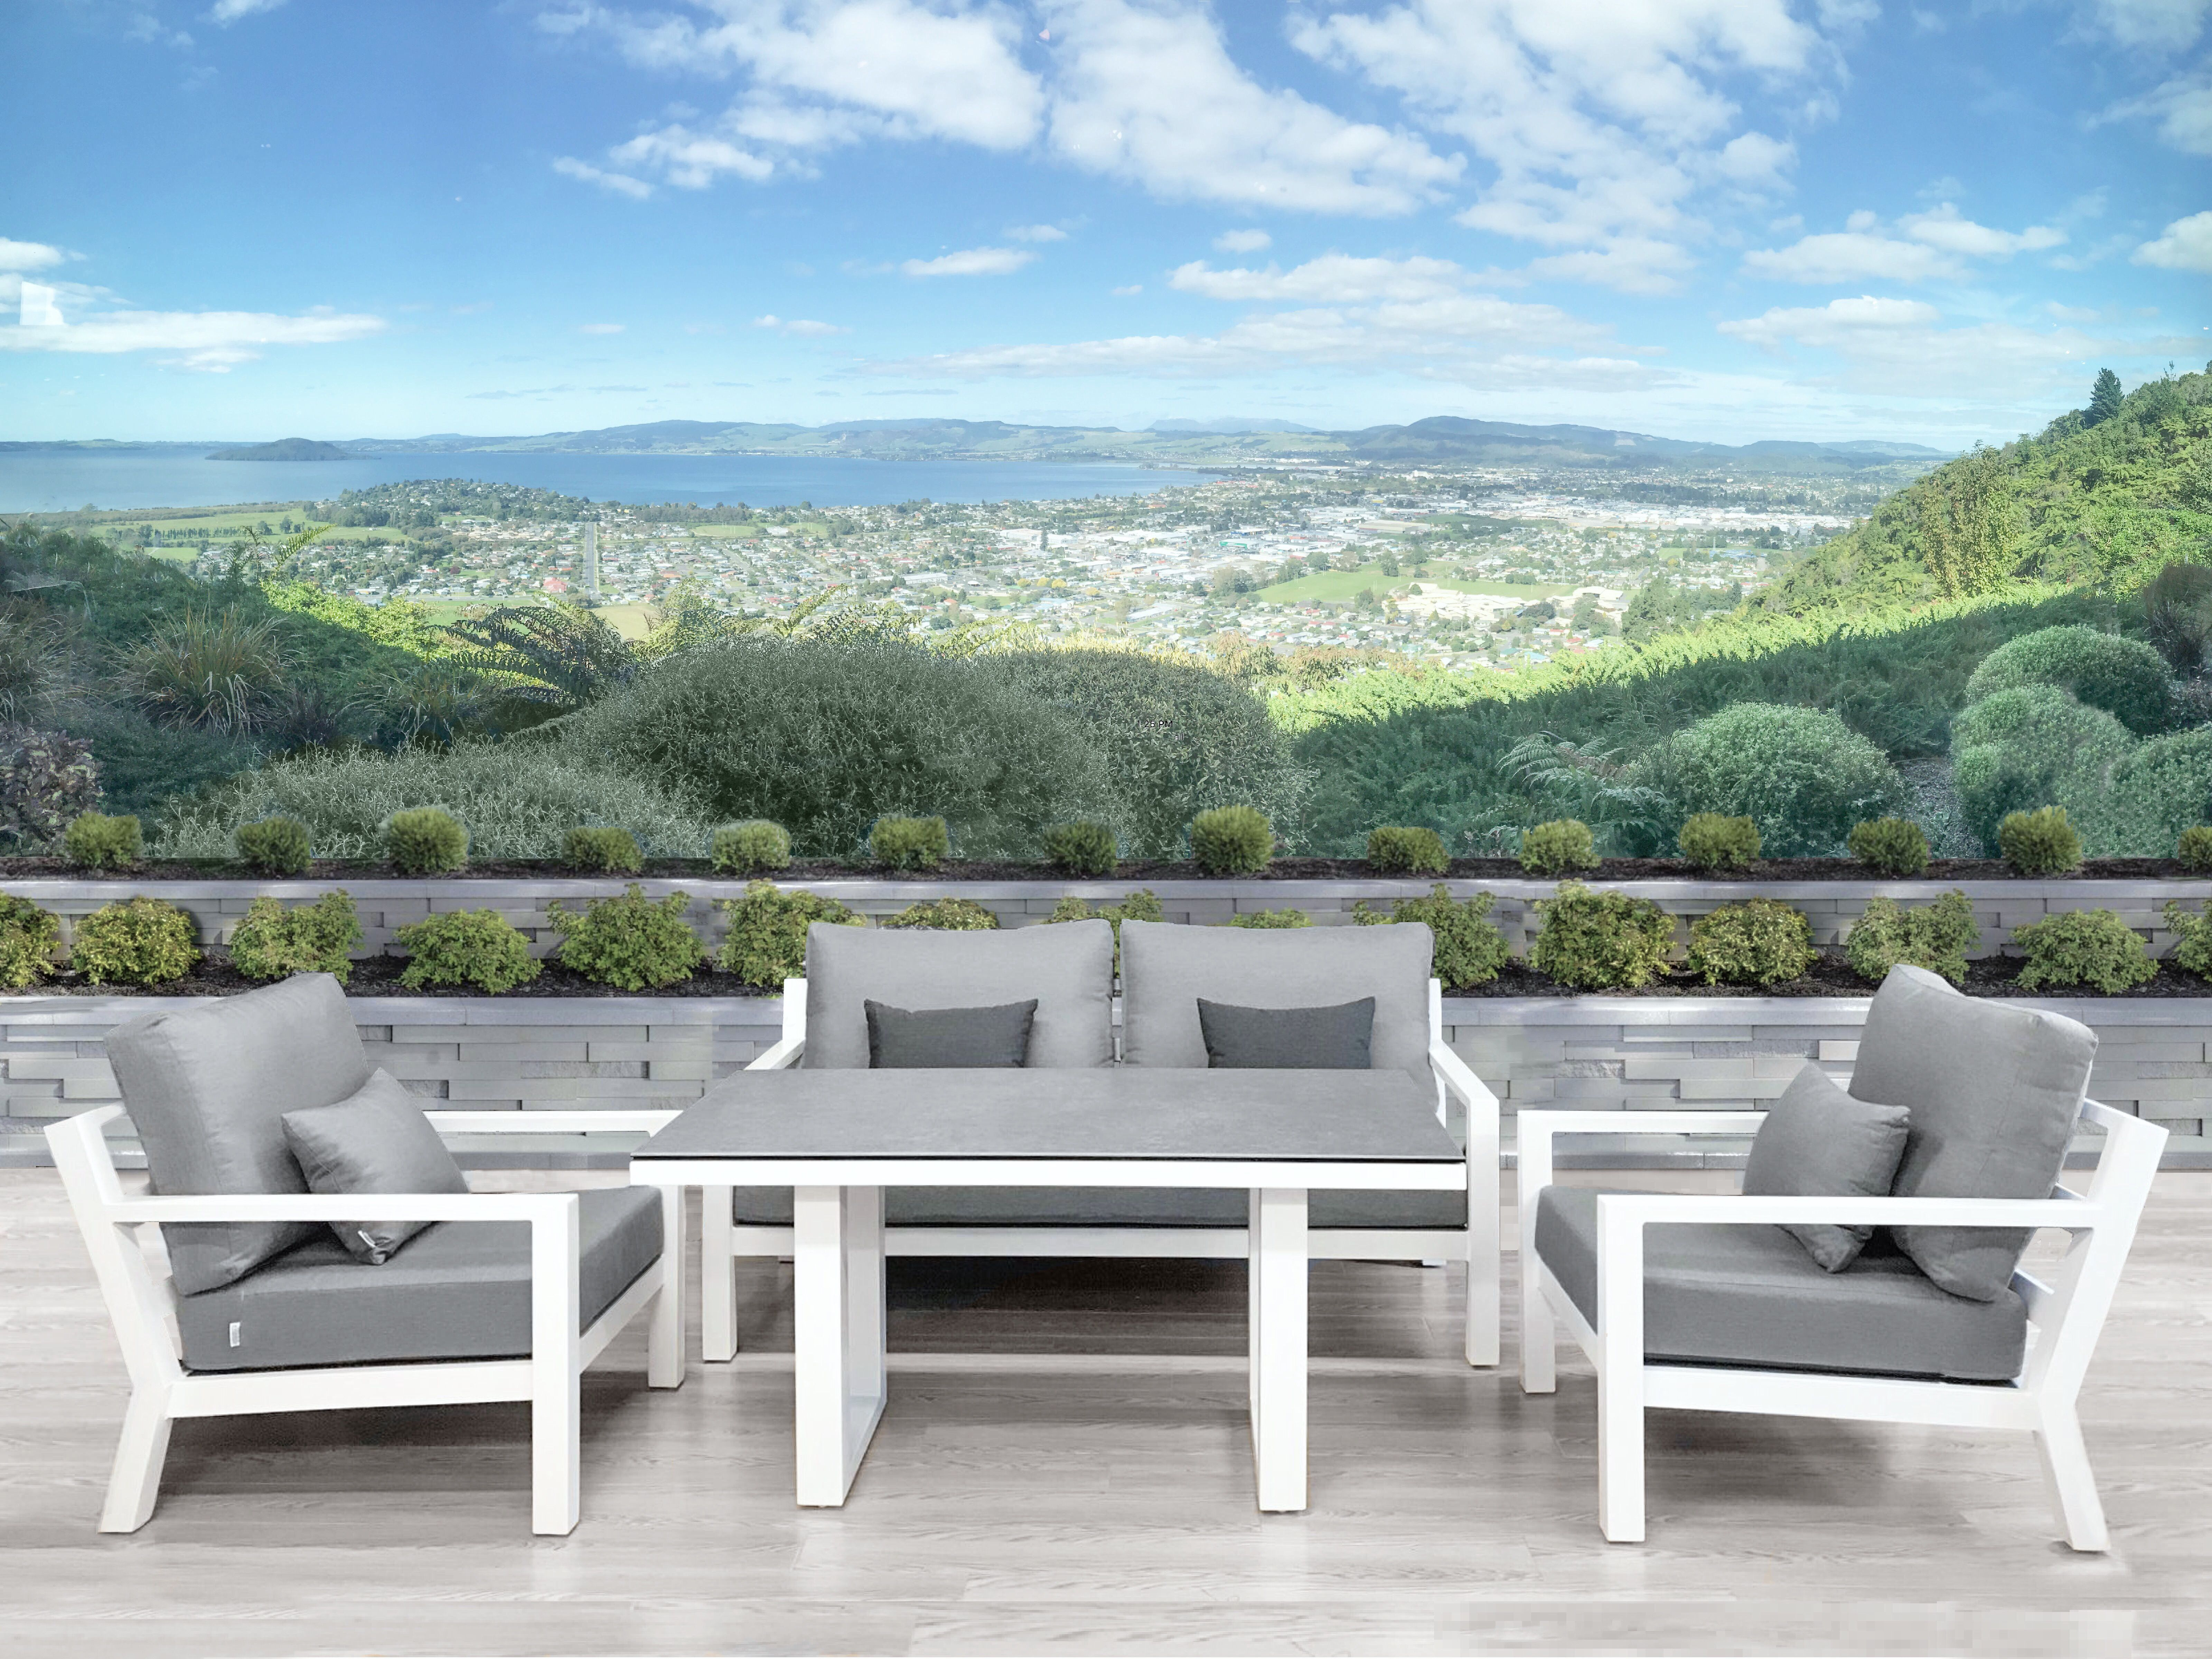 Modern Style Outdoor Furniture Nz Auckland Tauranga in size 6400 X 4800